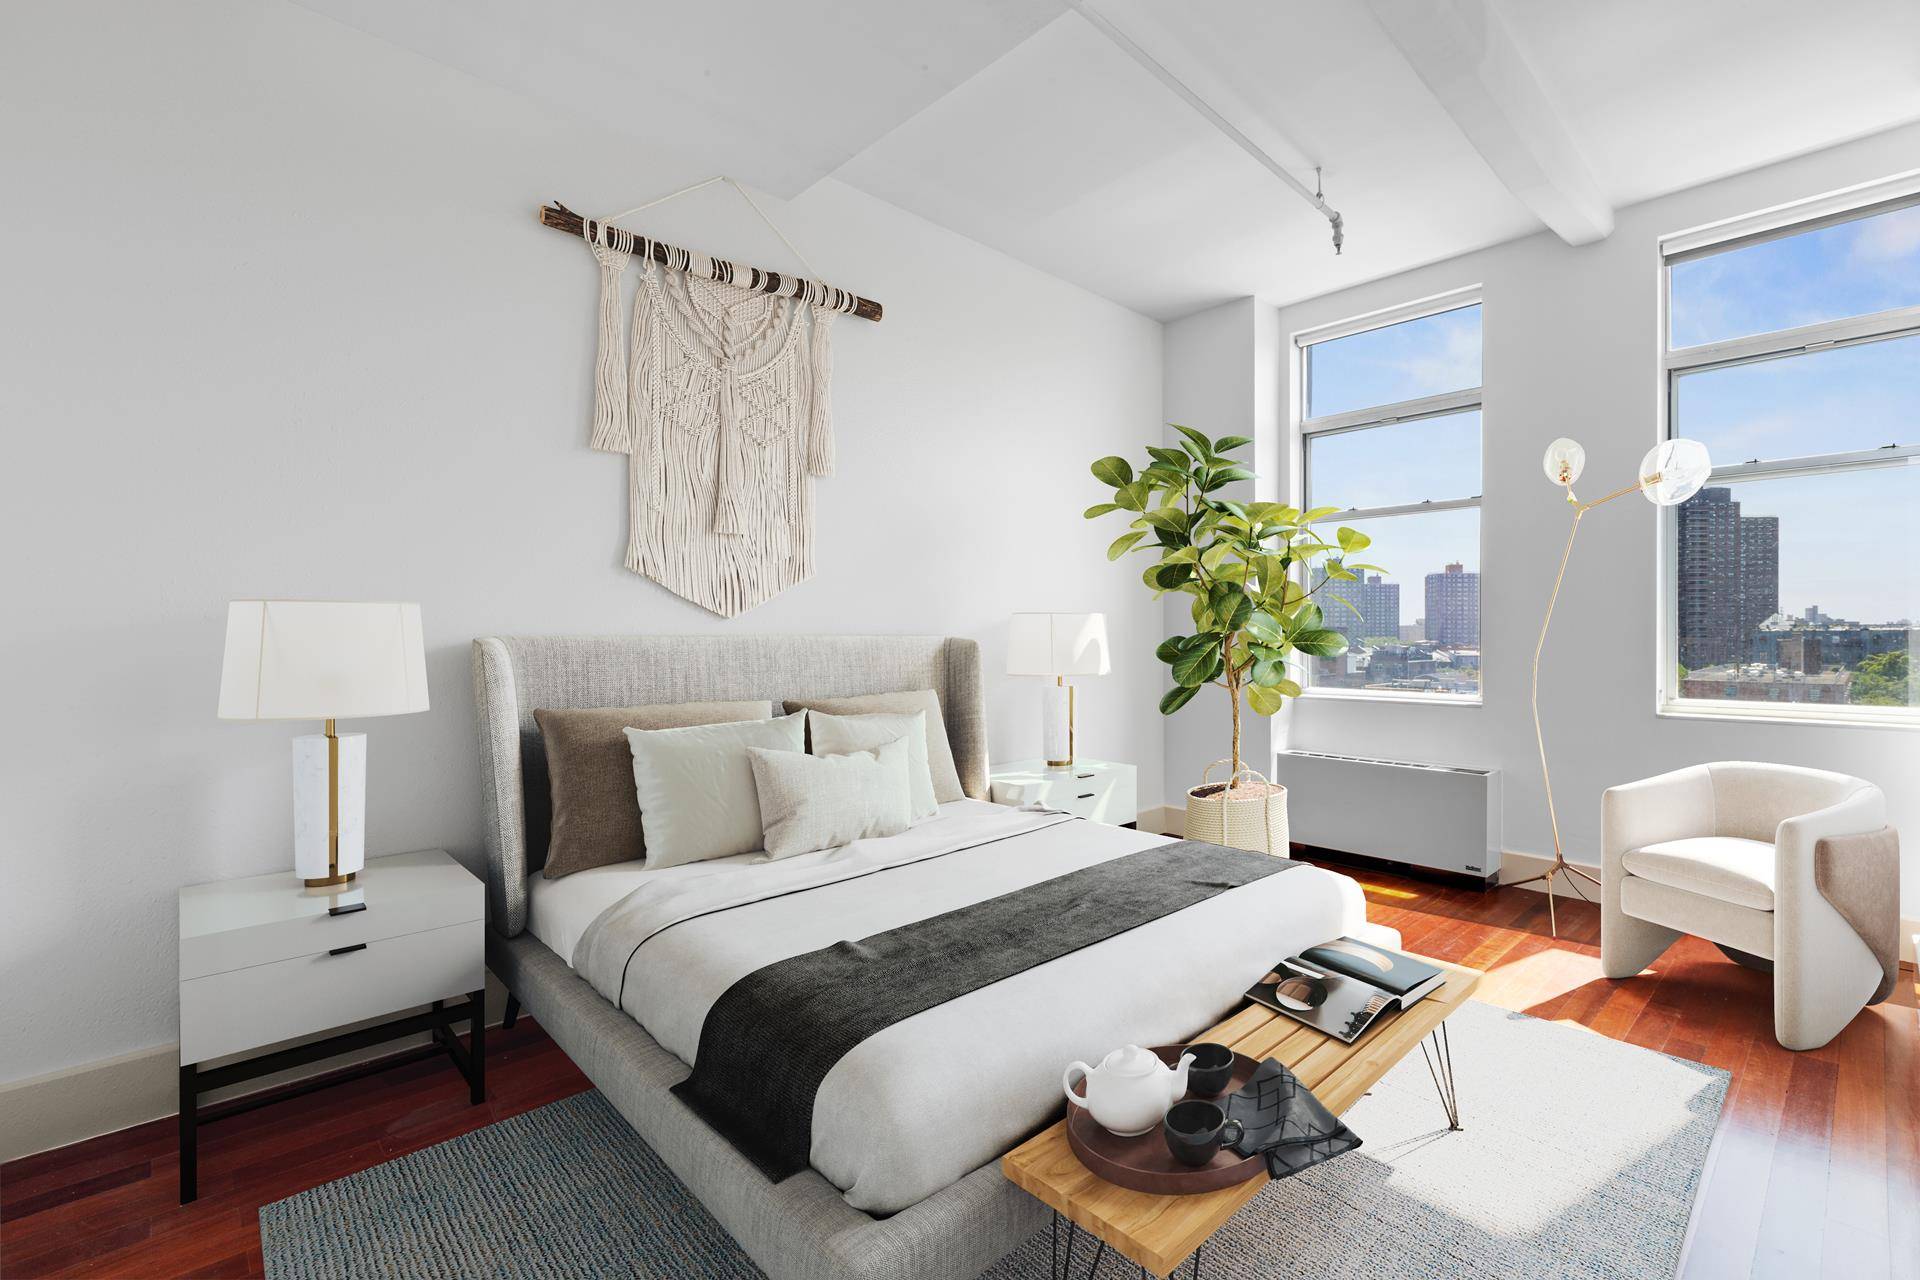 One of the largest and most luxurious true industrial loft one bed apartments in North Brooklyn awaits in Williamsburg's iconic Gretsch building, the original home to Gretsch musical instruments.